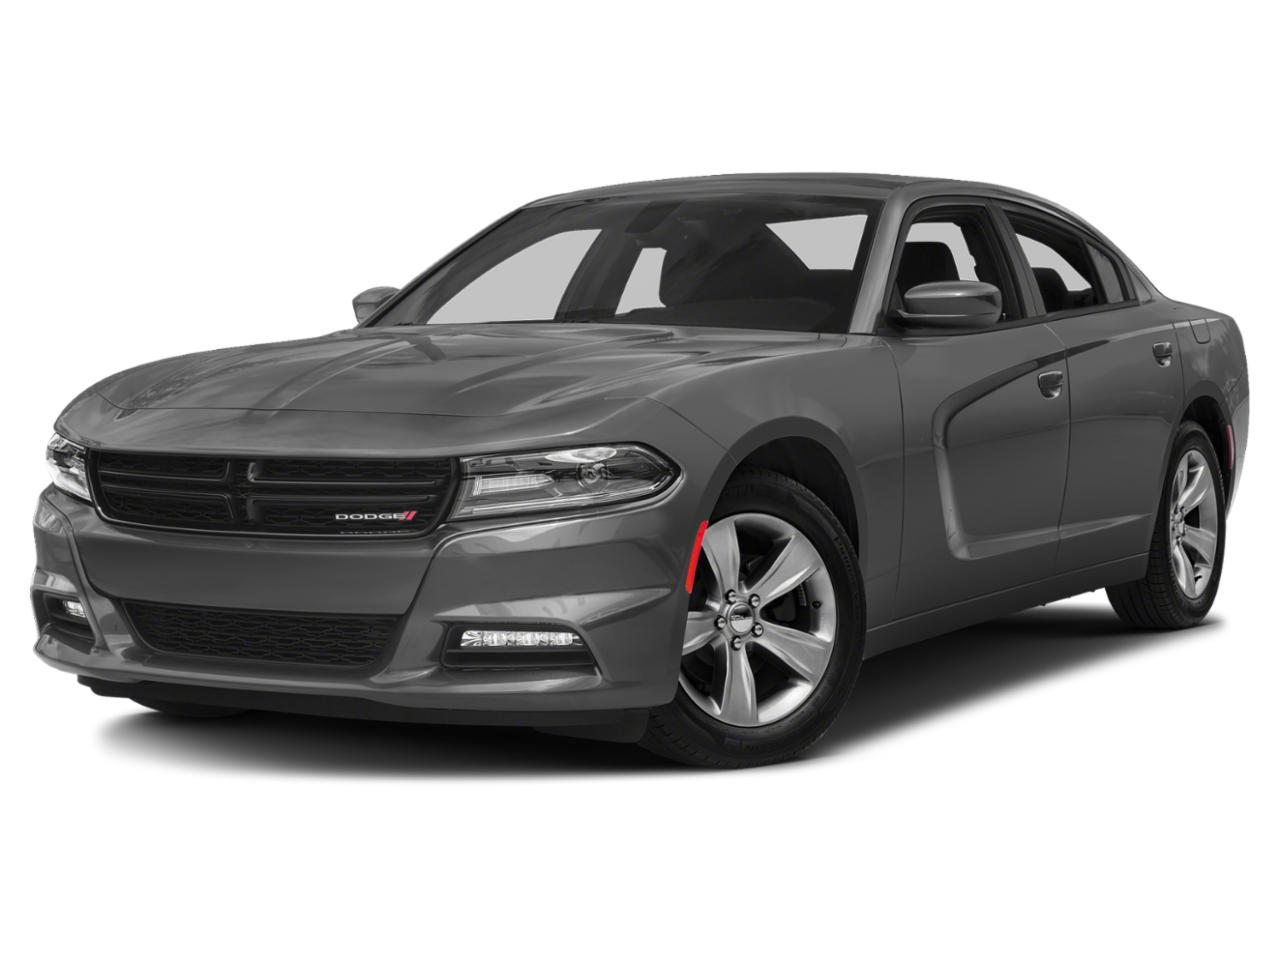 2018 Dodge Charger Vehicle Photo in Ennis, TX 75119